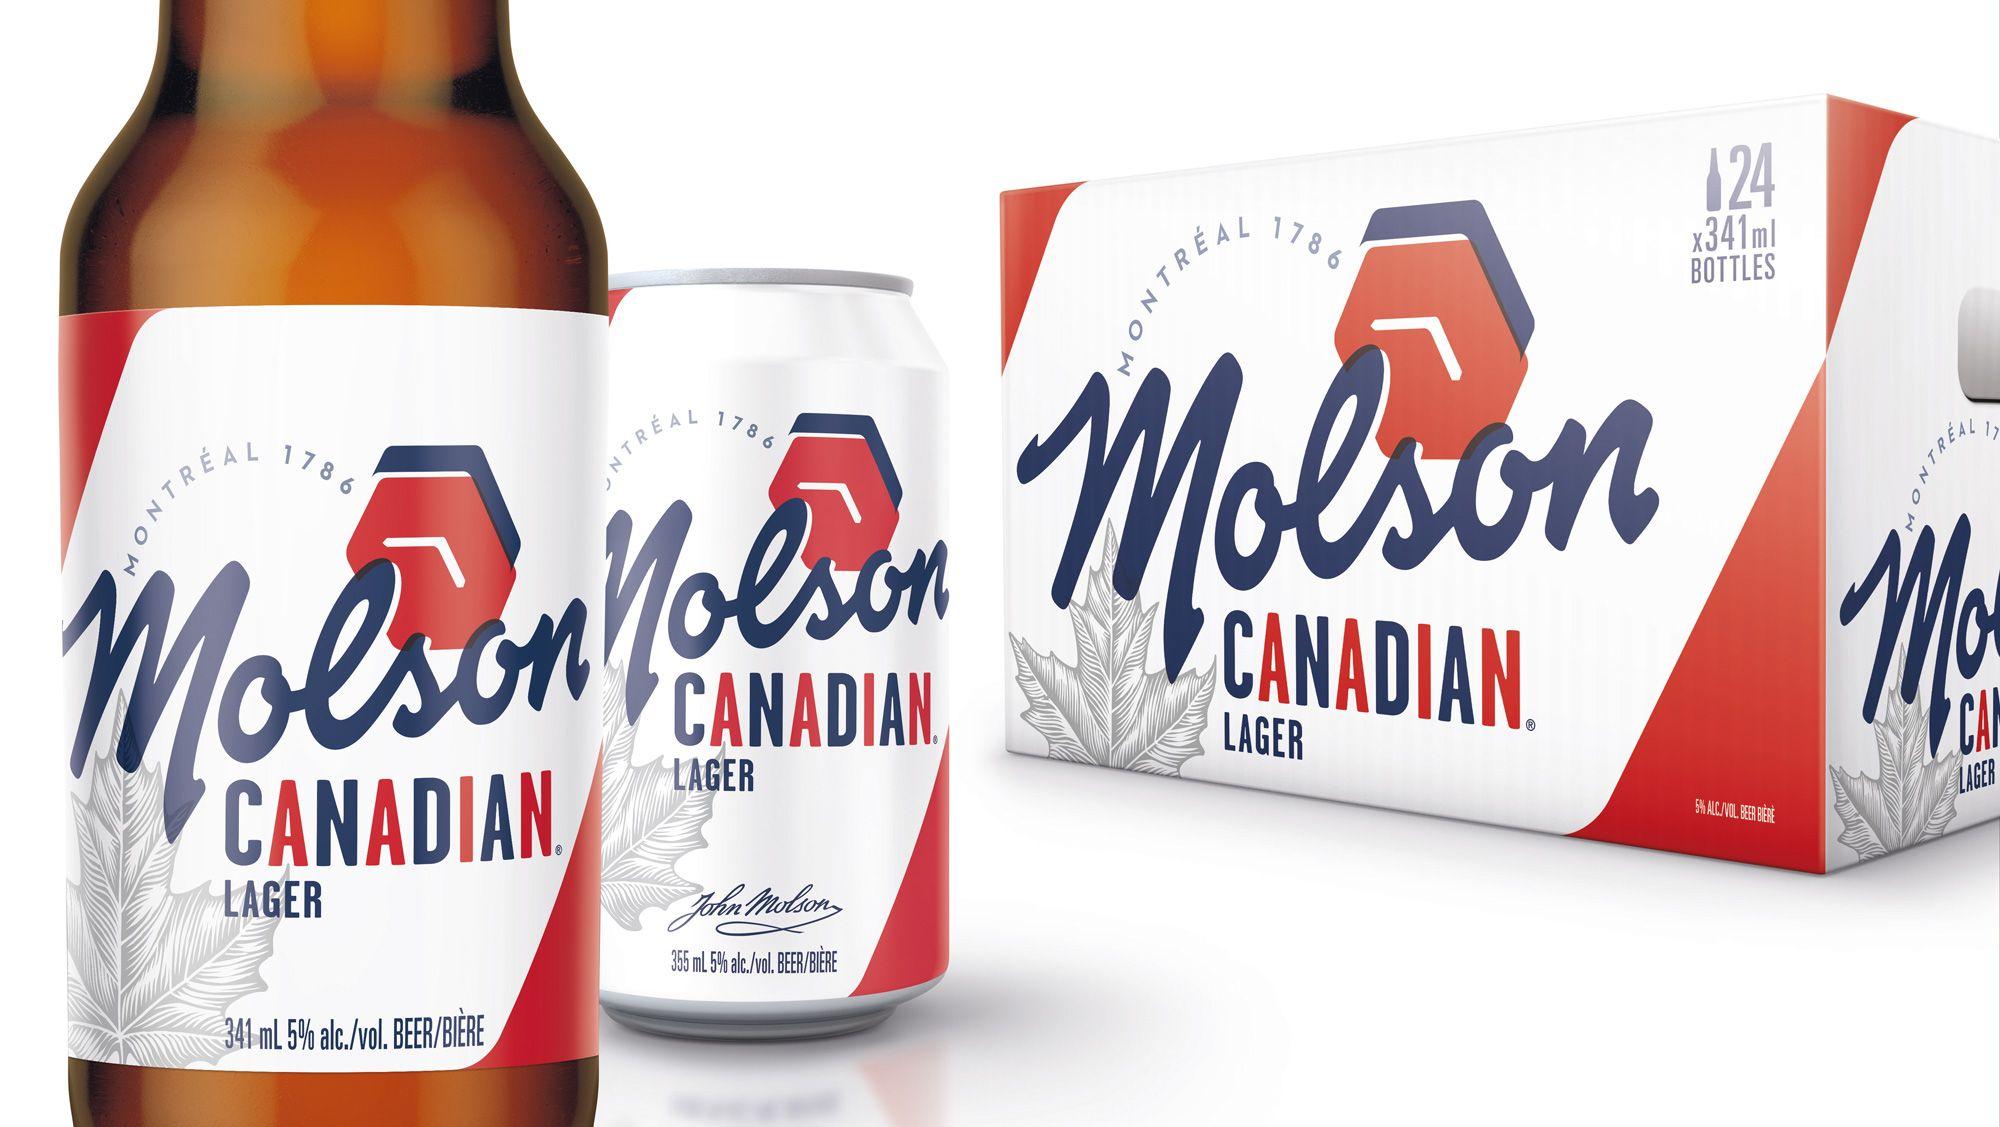 Molson Canadian Logo - Brand New: New Logo and Packaging for Molson Brands